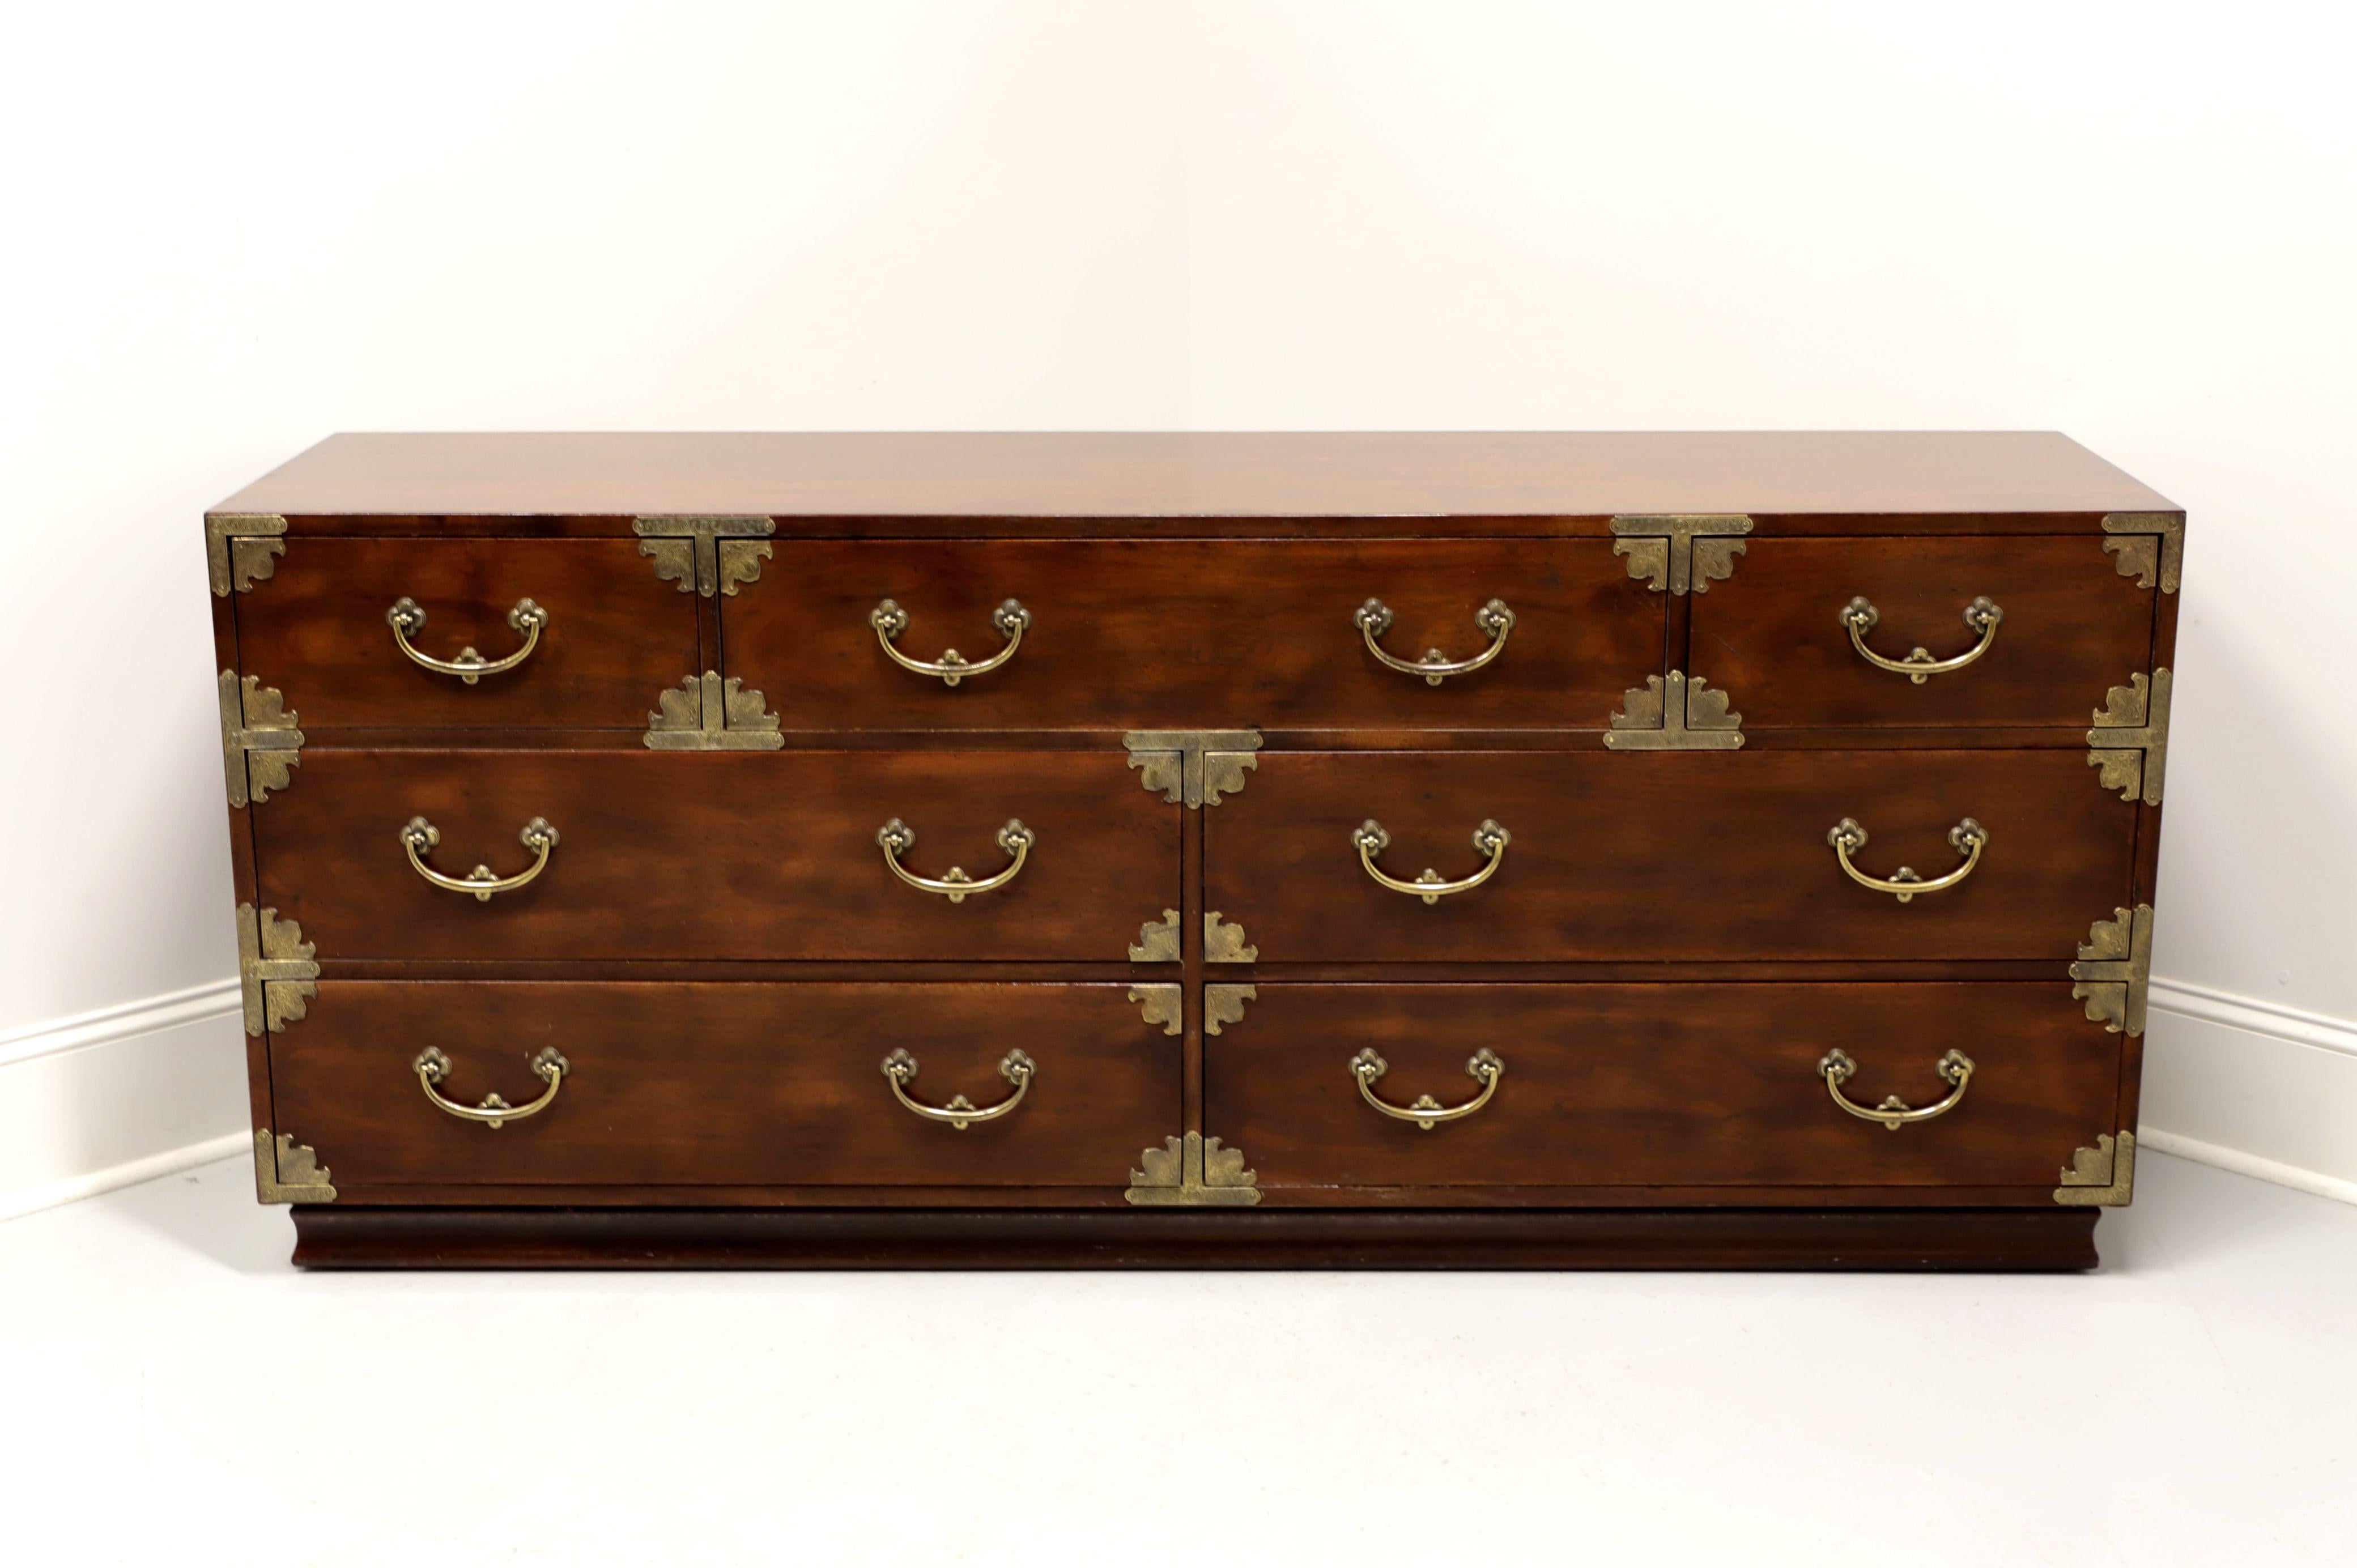 A dresser in the Japanese Tansu Campaign style by Henredon. Walnut with brass hardware and accents. Features seven various size dovetail drawers, top center has removable dividers and a jewelry tray with lower two drawers having removable dividers.